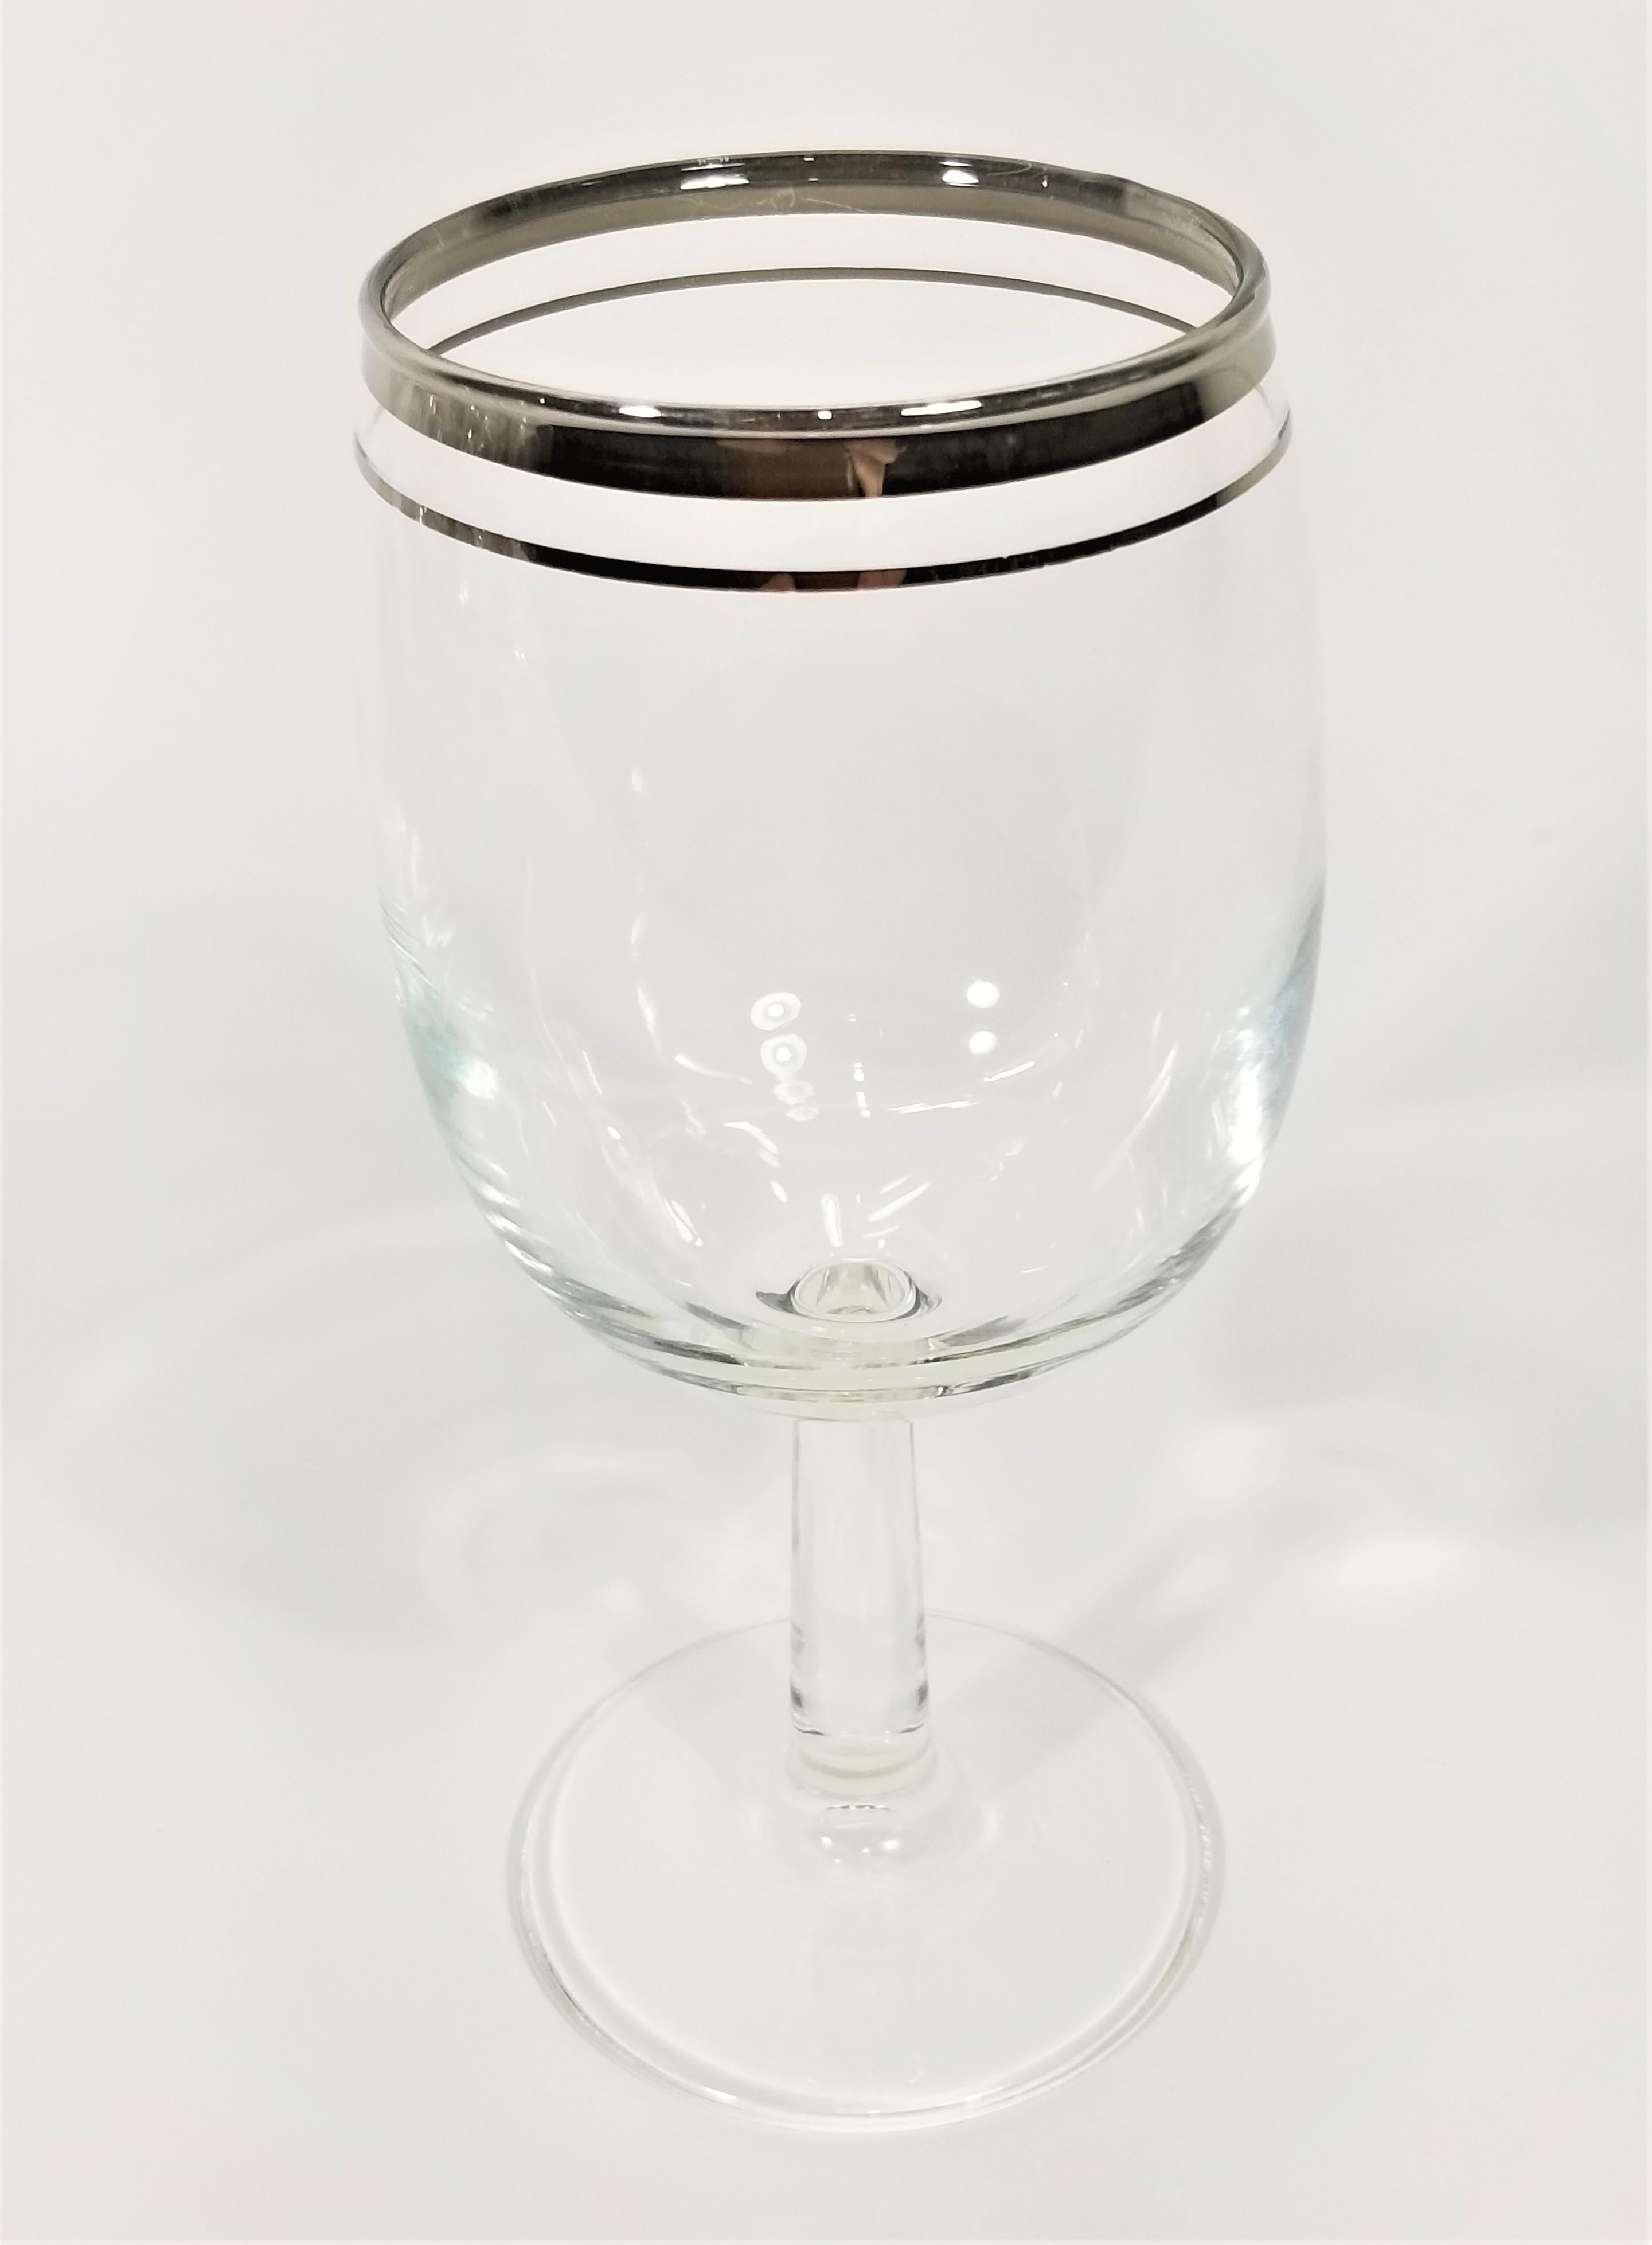 Silver Rimmed Stemware Wine Glasses Midcentury Set of 10 In Good Condition For Sale In New York, NY